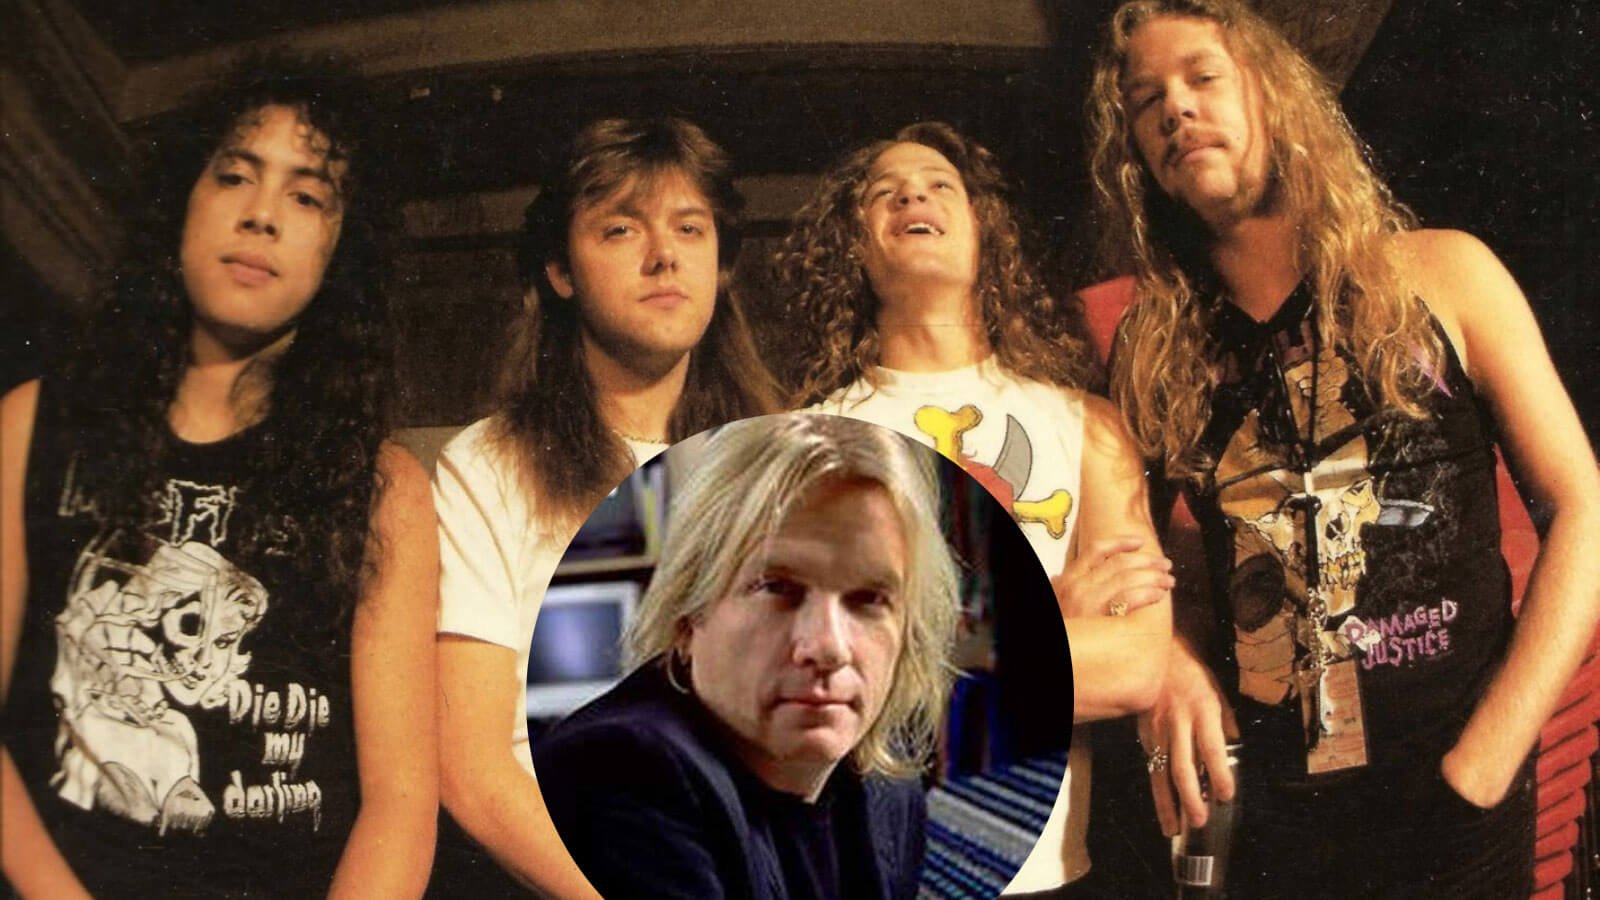 Metallica's old producer Bob Rock: "Could stretch the boundaries"